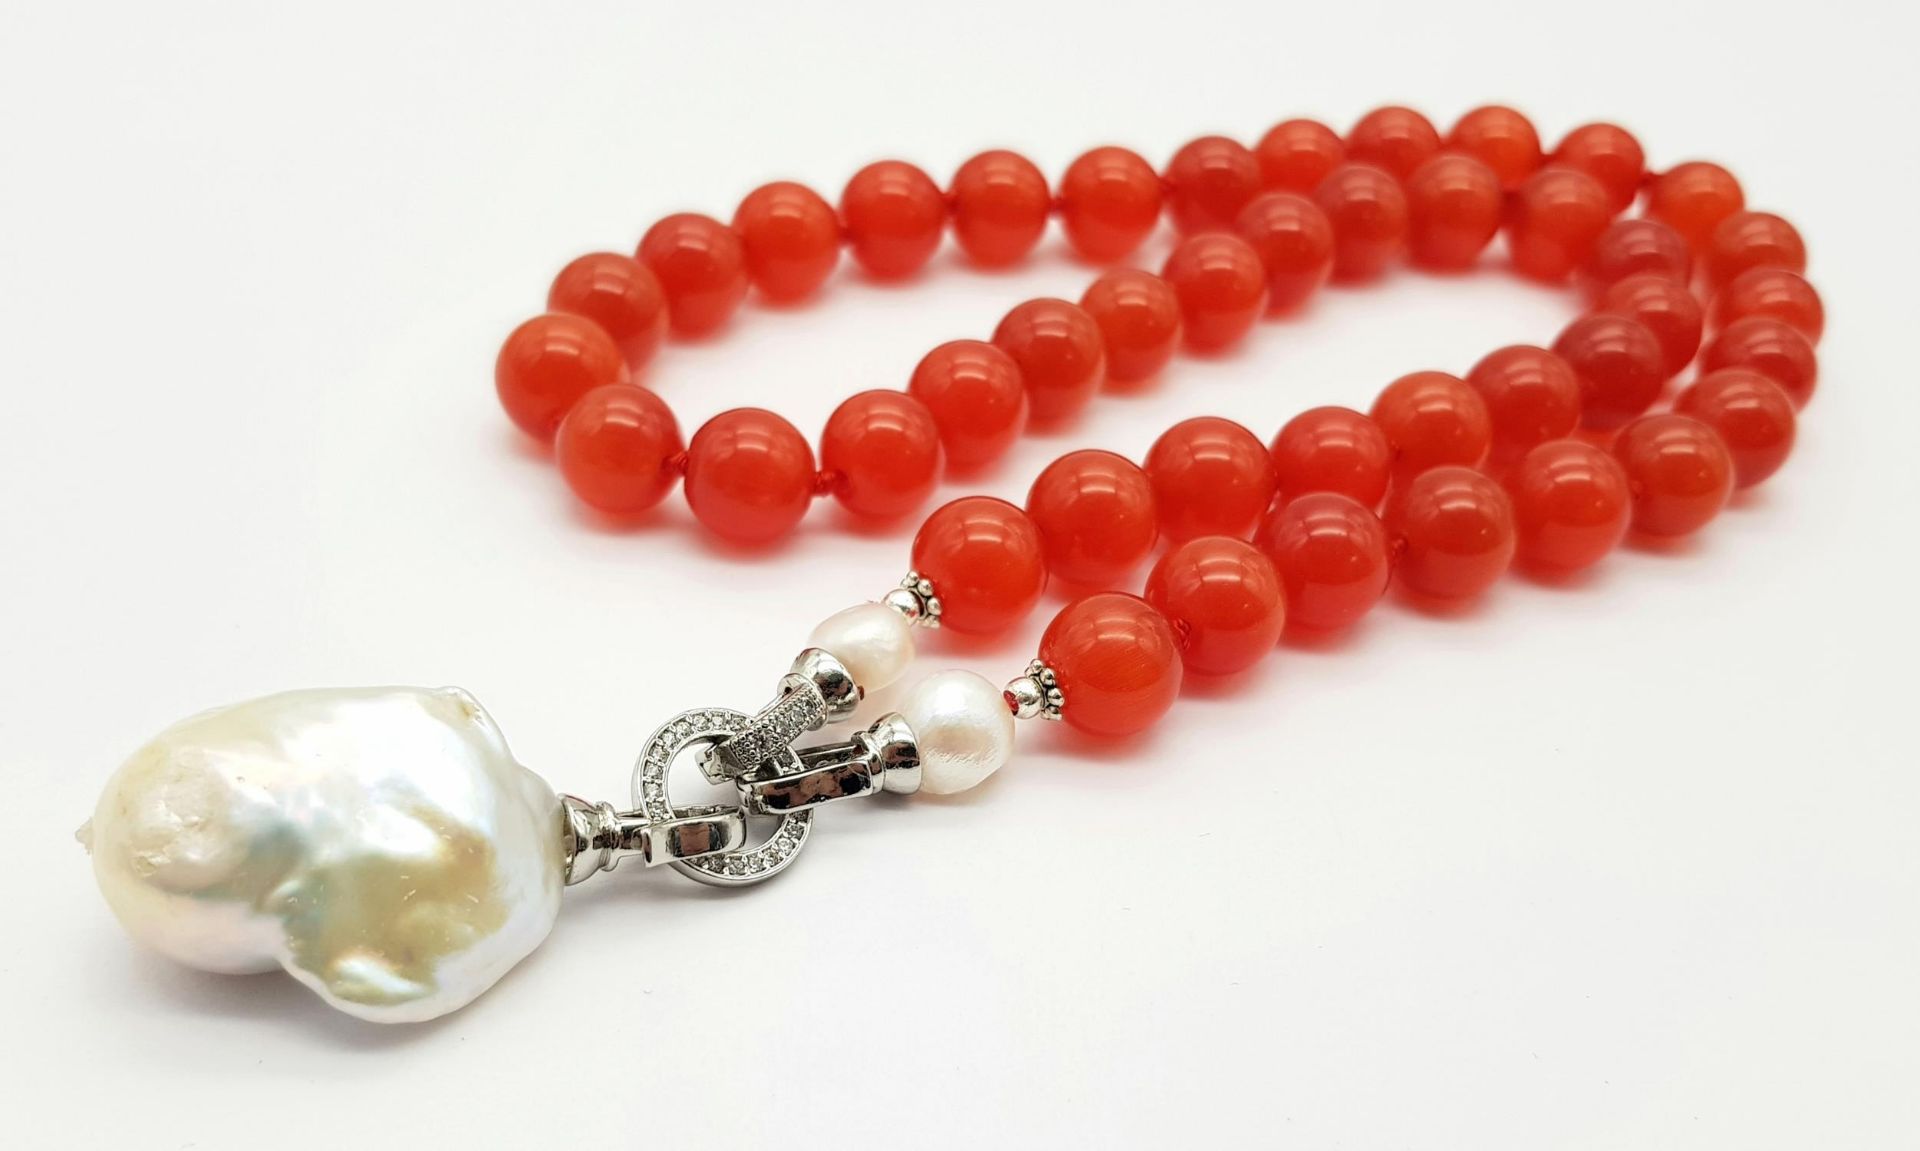 A Deep Orange Cat's Eye Beaded Necklace with a Hanging Keisha Baroque Pearl Pendant. 12mm beads. - Bild 3 aus 4